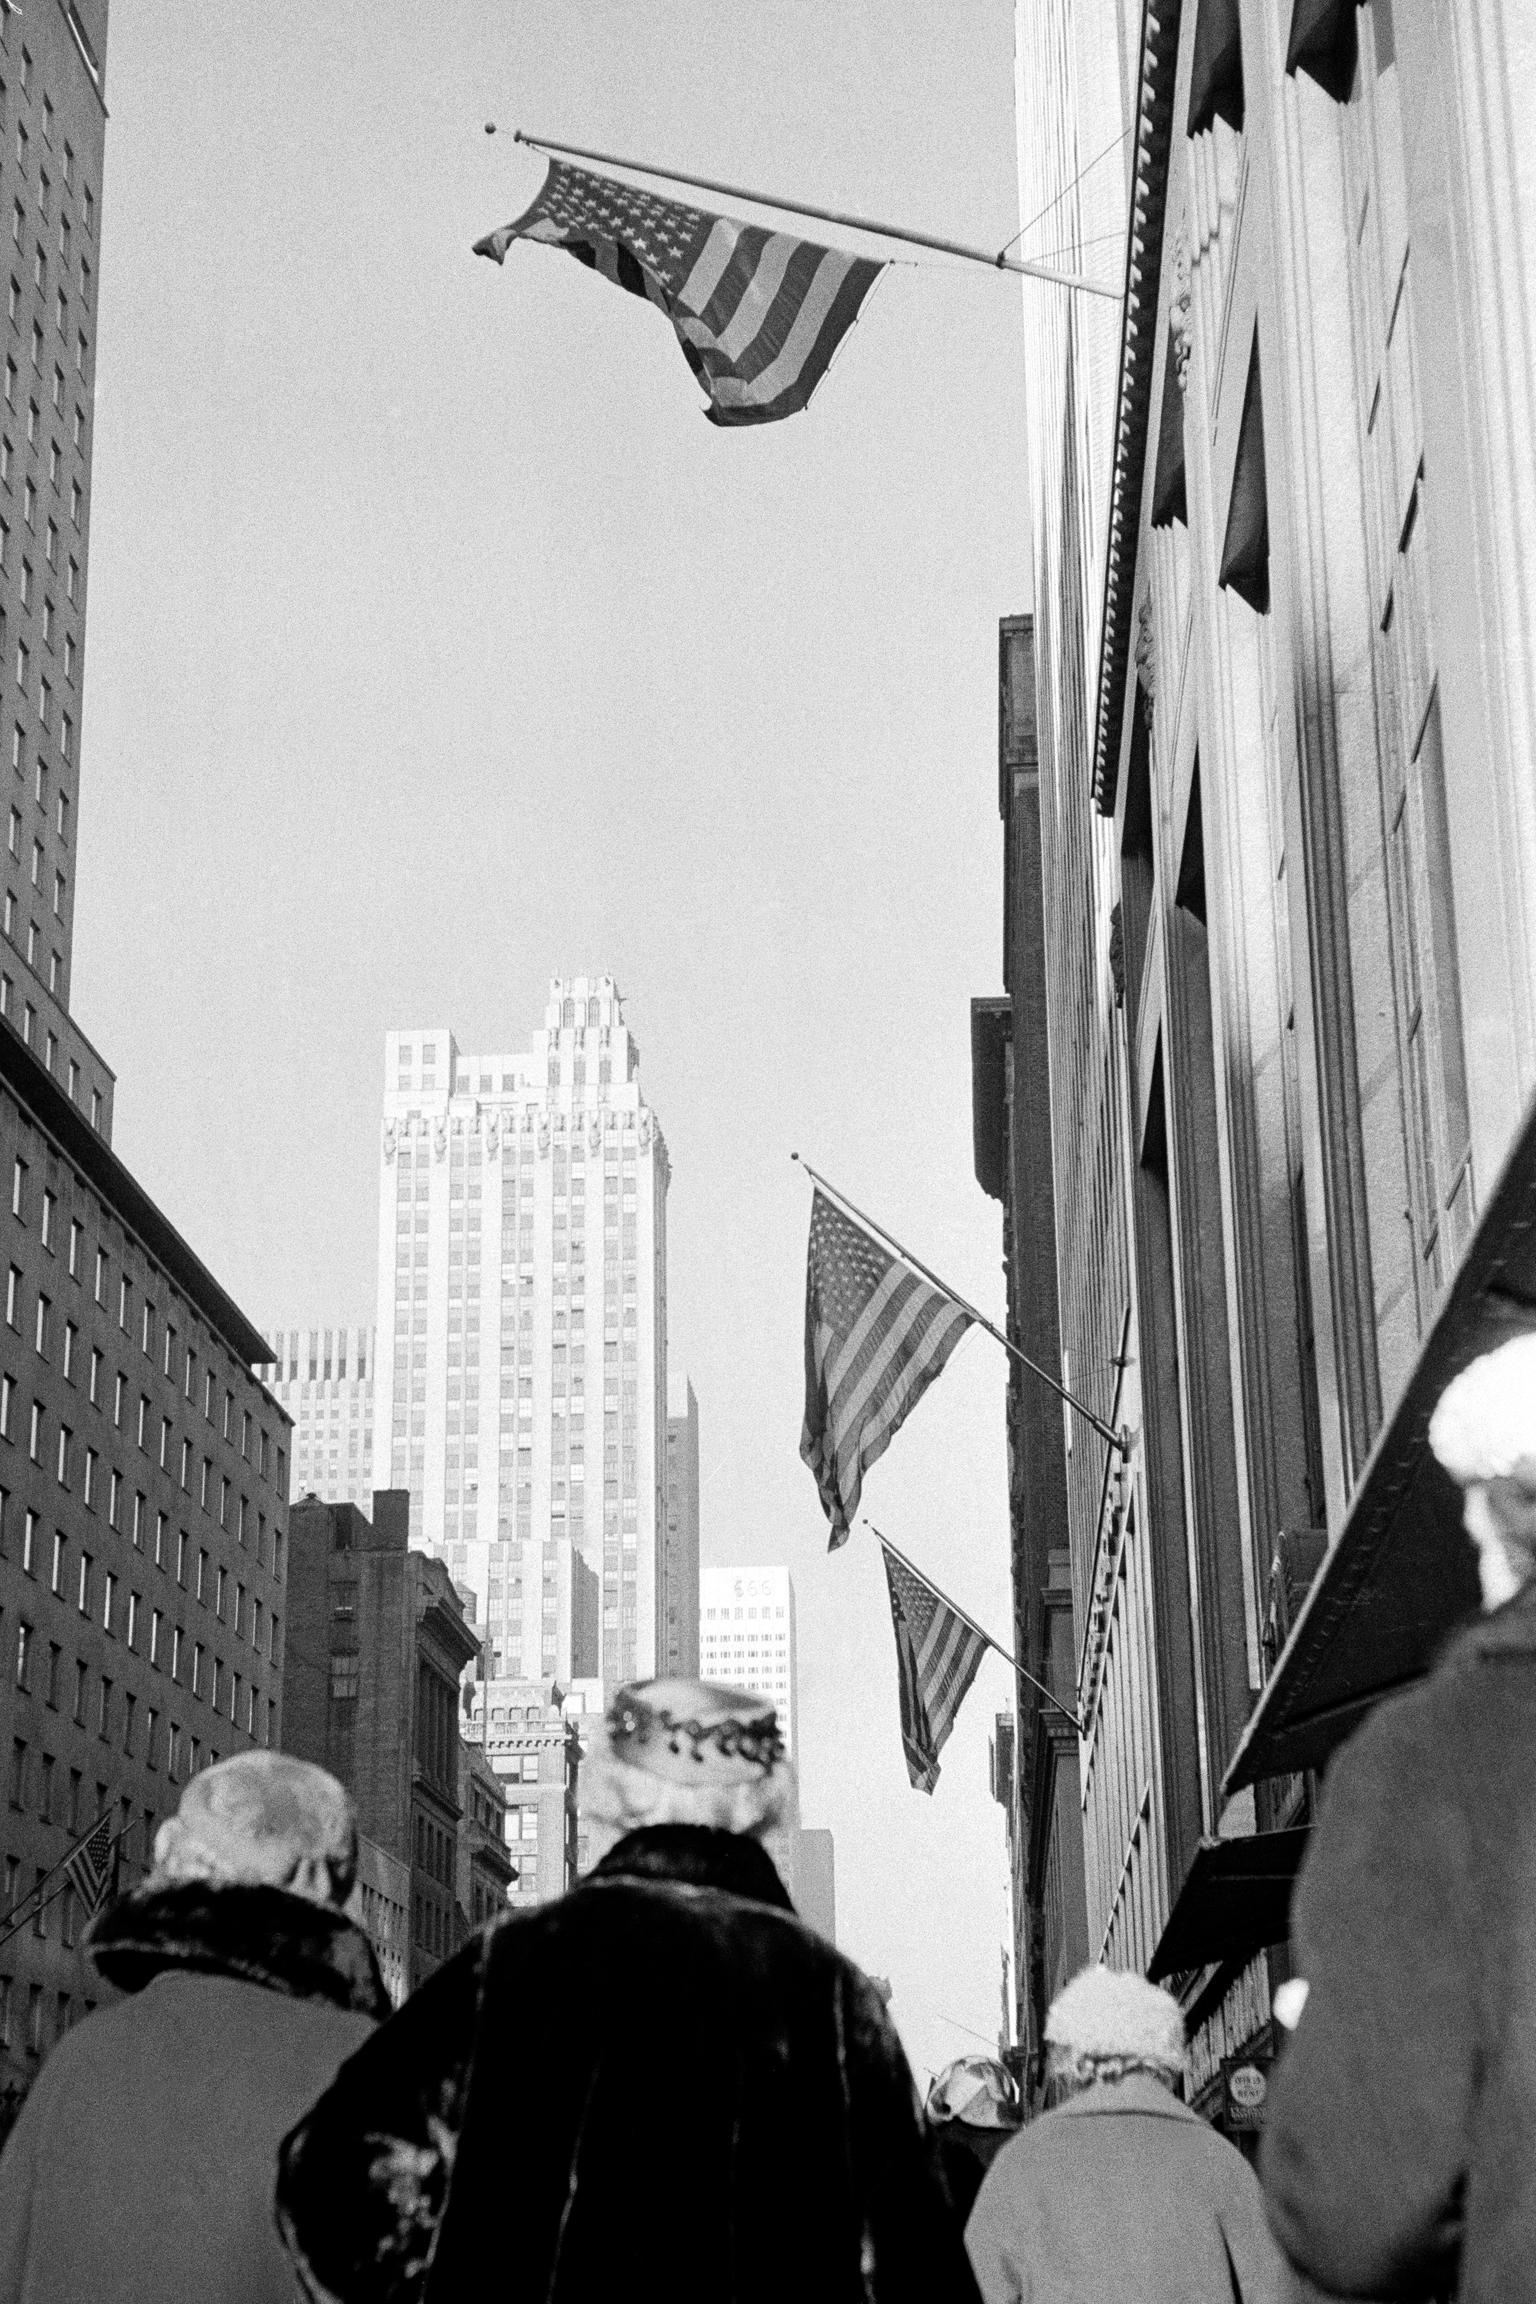 New Yorkers and the American flag. Fifth Avenue. Manhattan, New York USA